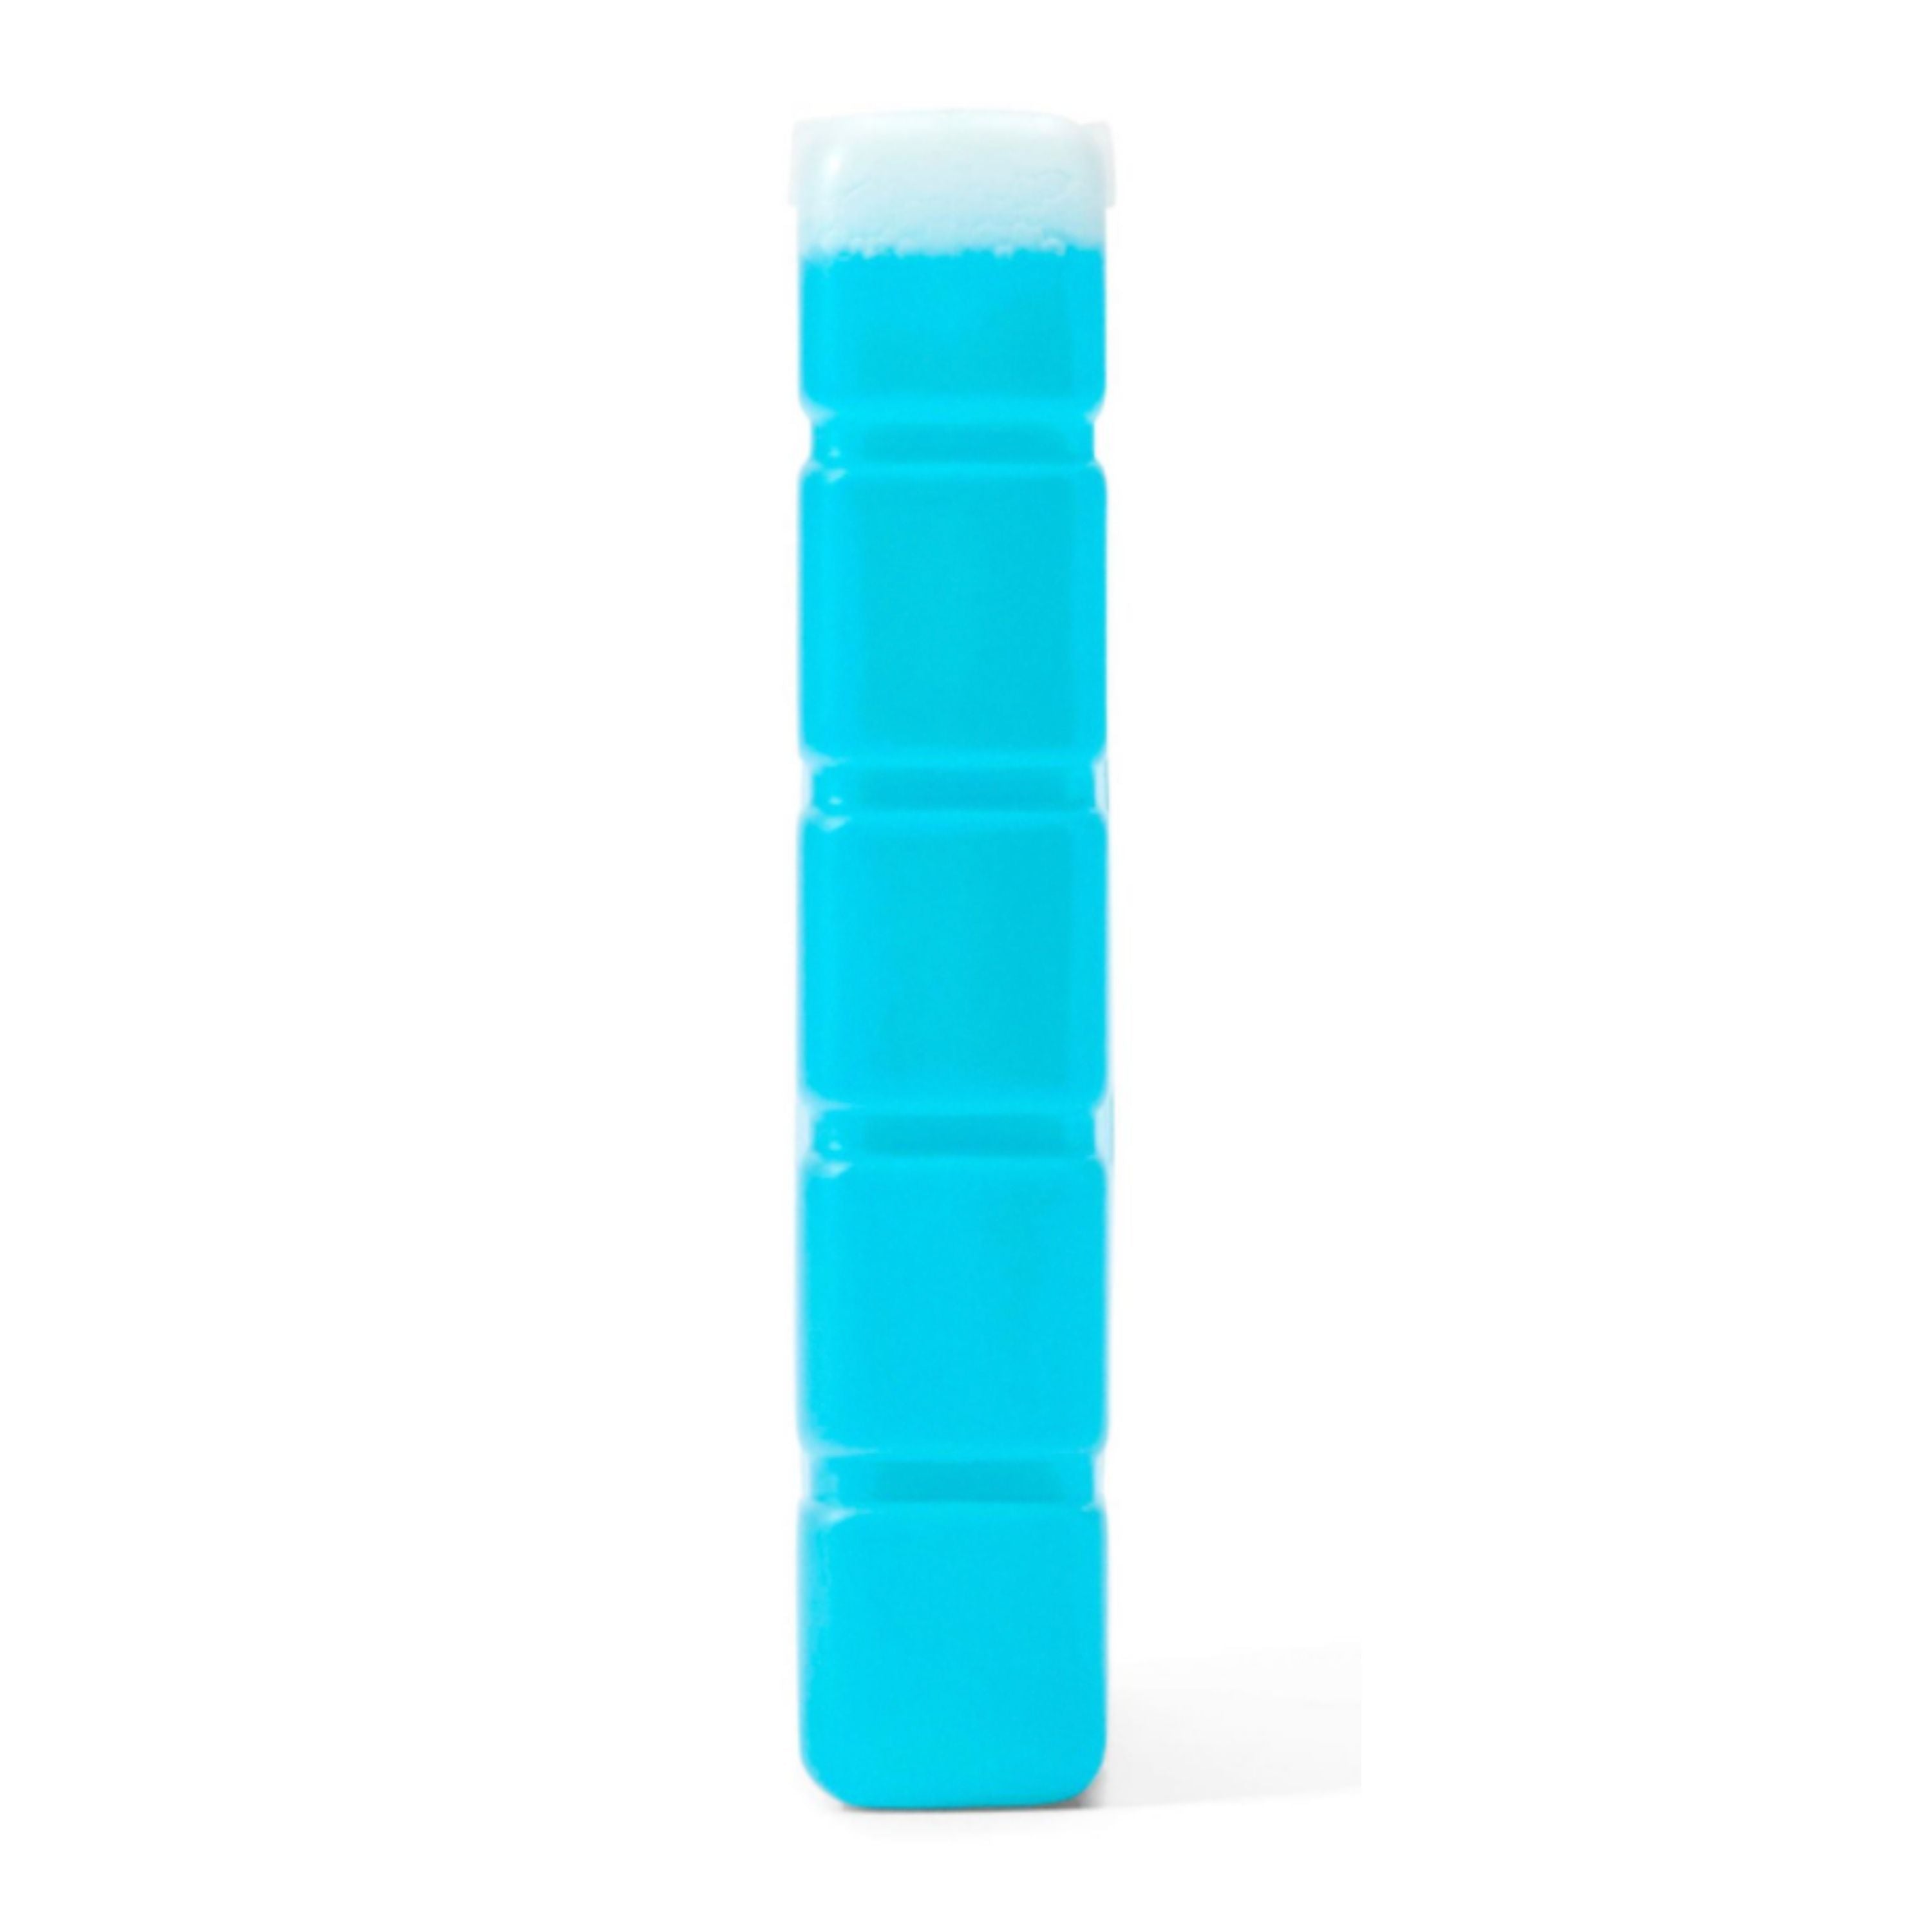 "Chiller" Ice pack - Small